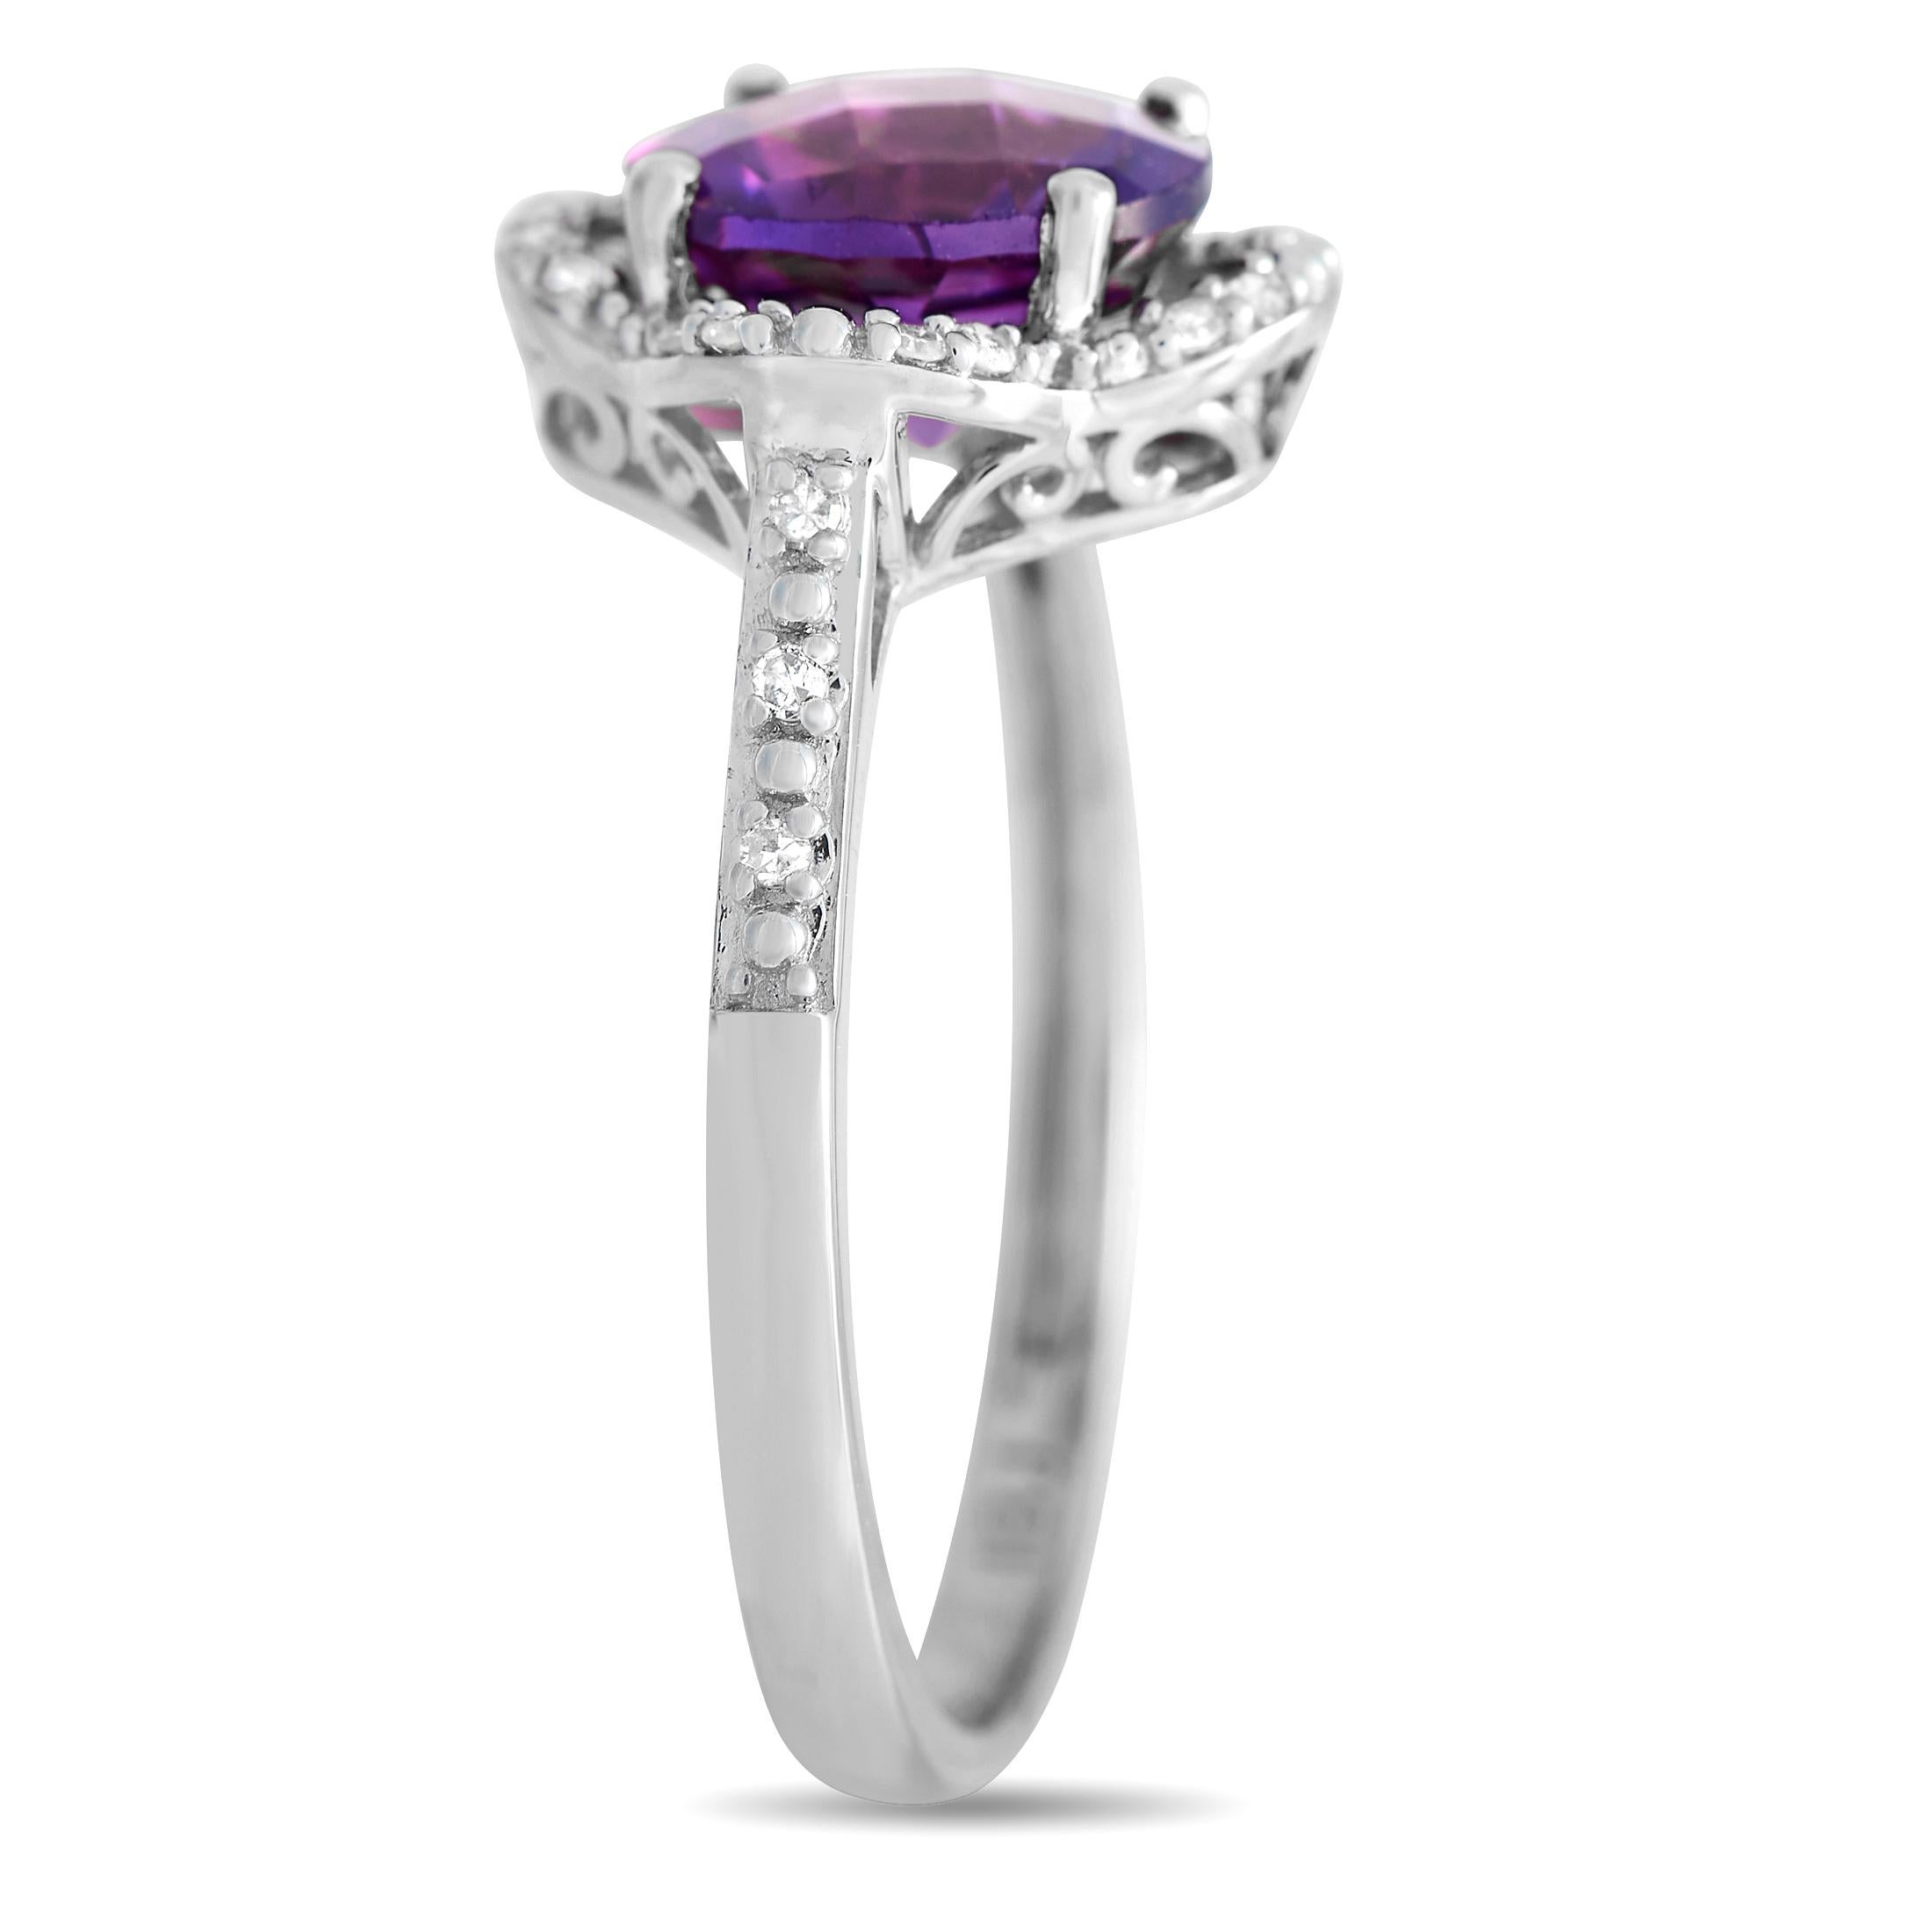 A stunning gift choice for a loved one born in February. This beautiful ring in 14K white gold is topped with a round amethyst, the February birthstone. The faceted purple gem is held by four prongs and surrounded by a quatrefoil-shaped frame traced